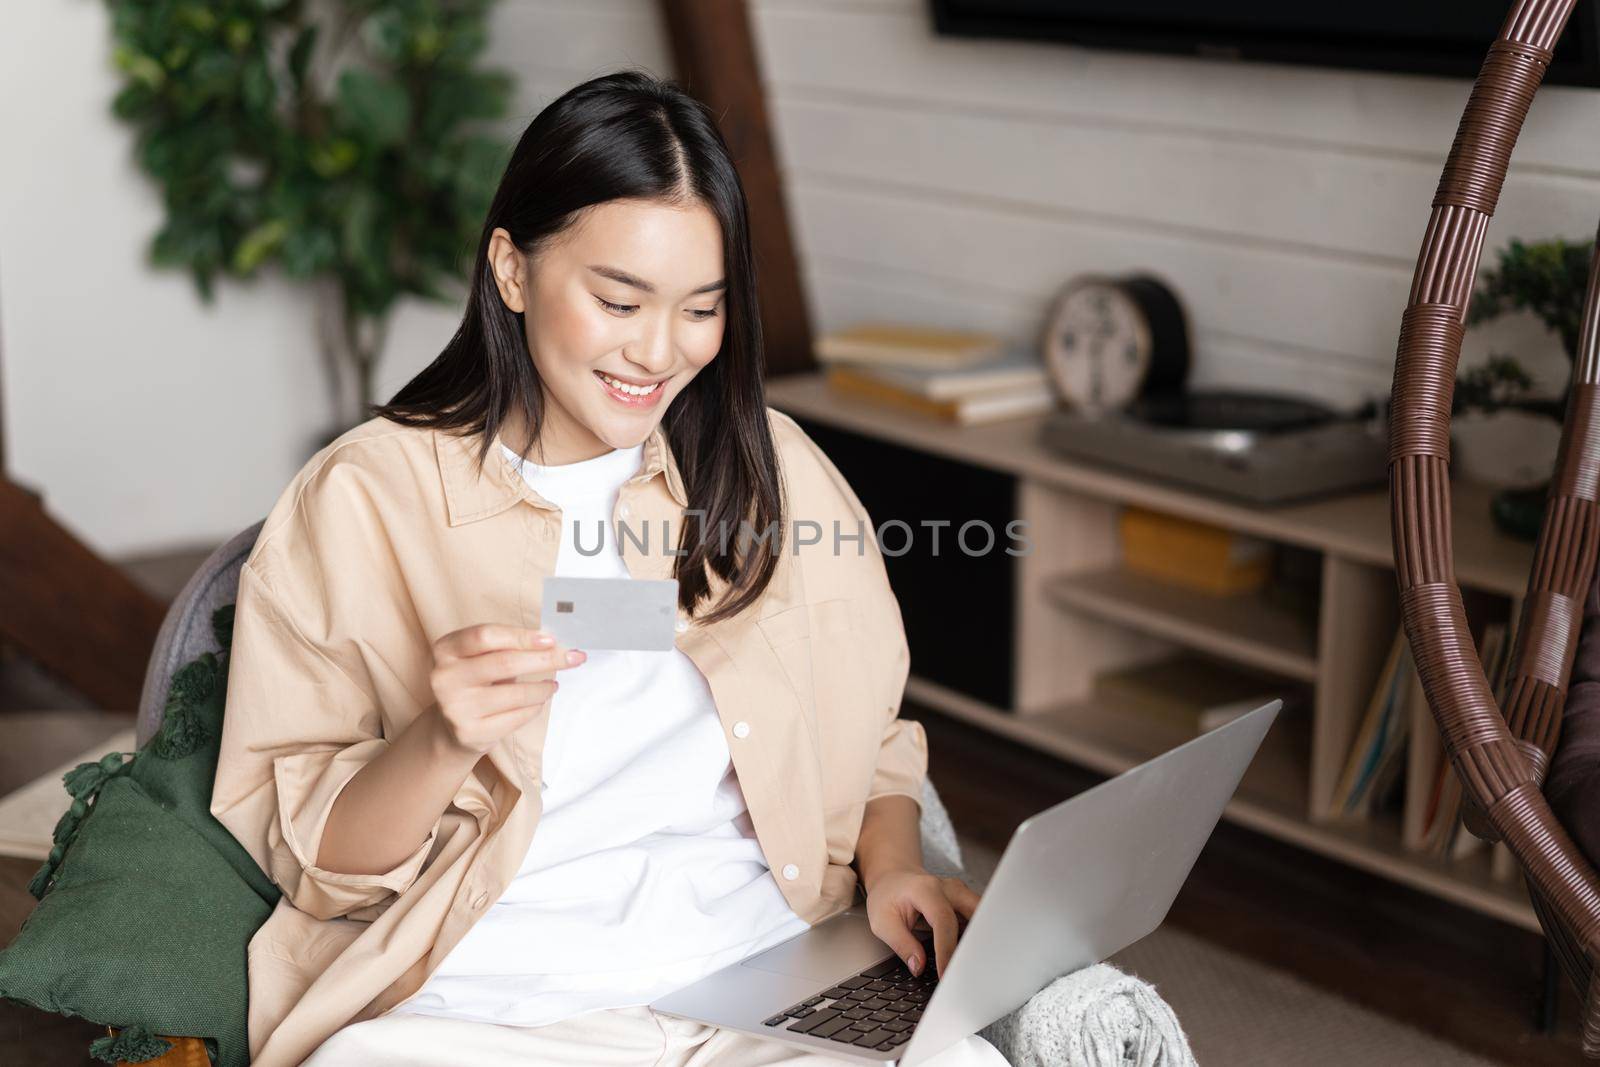 Smiling korean girl buying online from home, shopping on laptop and holding credit card.